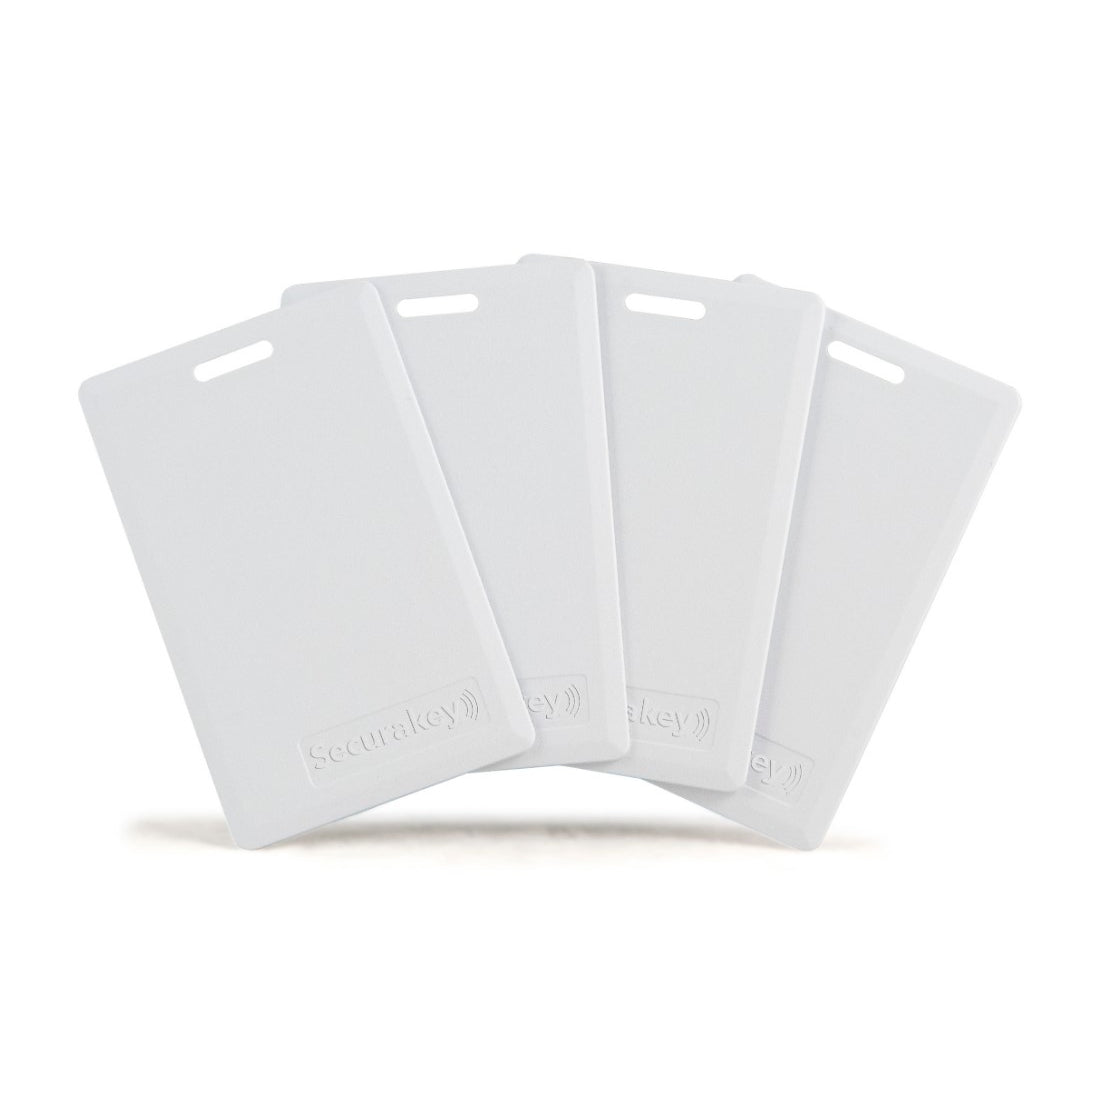 Security Brands 40-020 Clamshell Card SecuraKey (Qty 50)